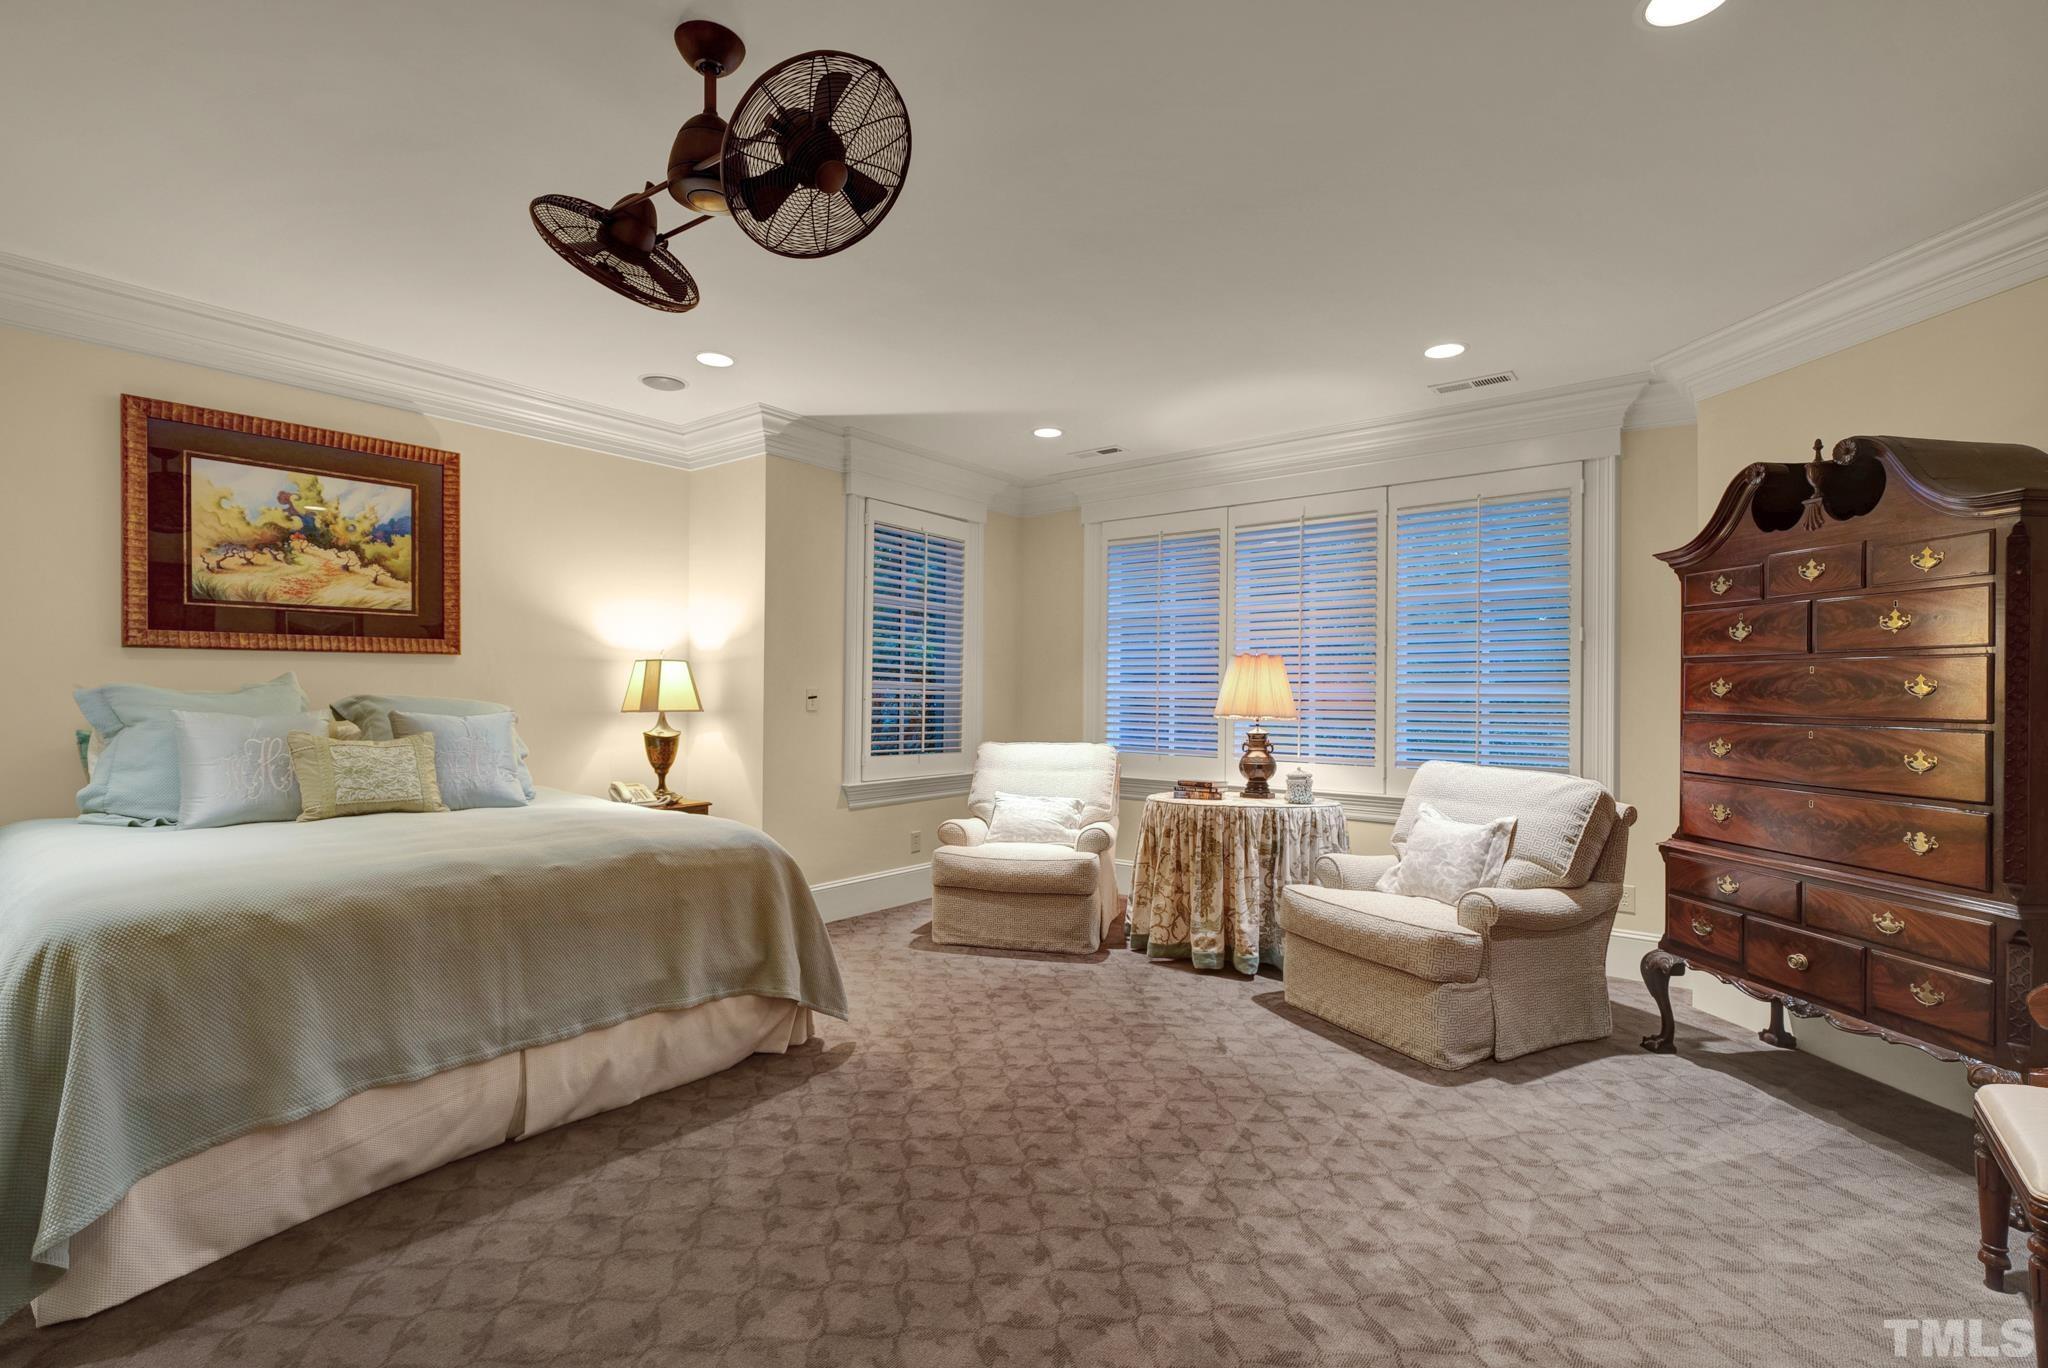 Each bedroom features own en-suites with custom trim and walk in closets.